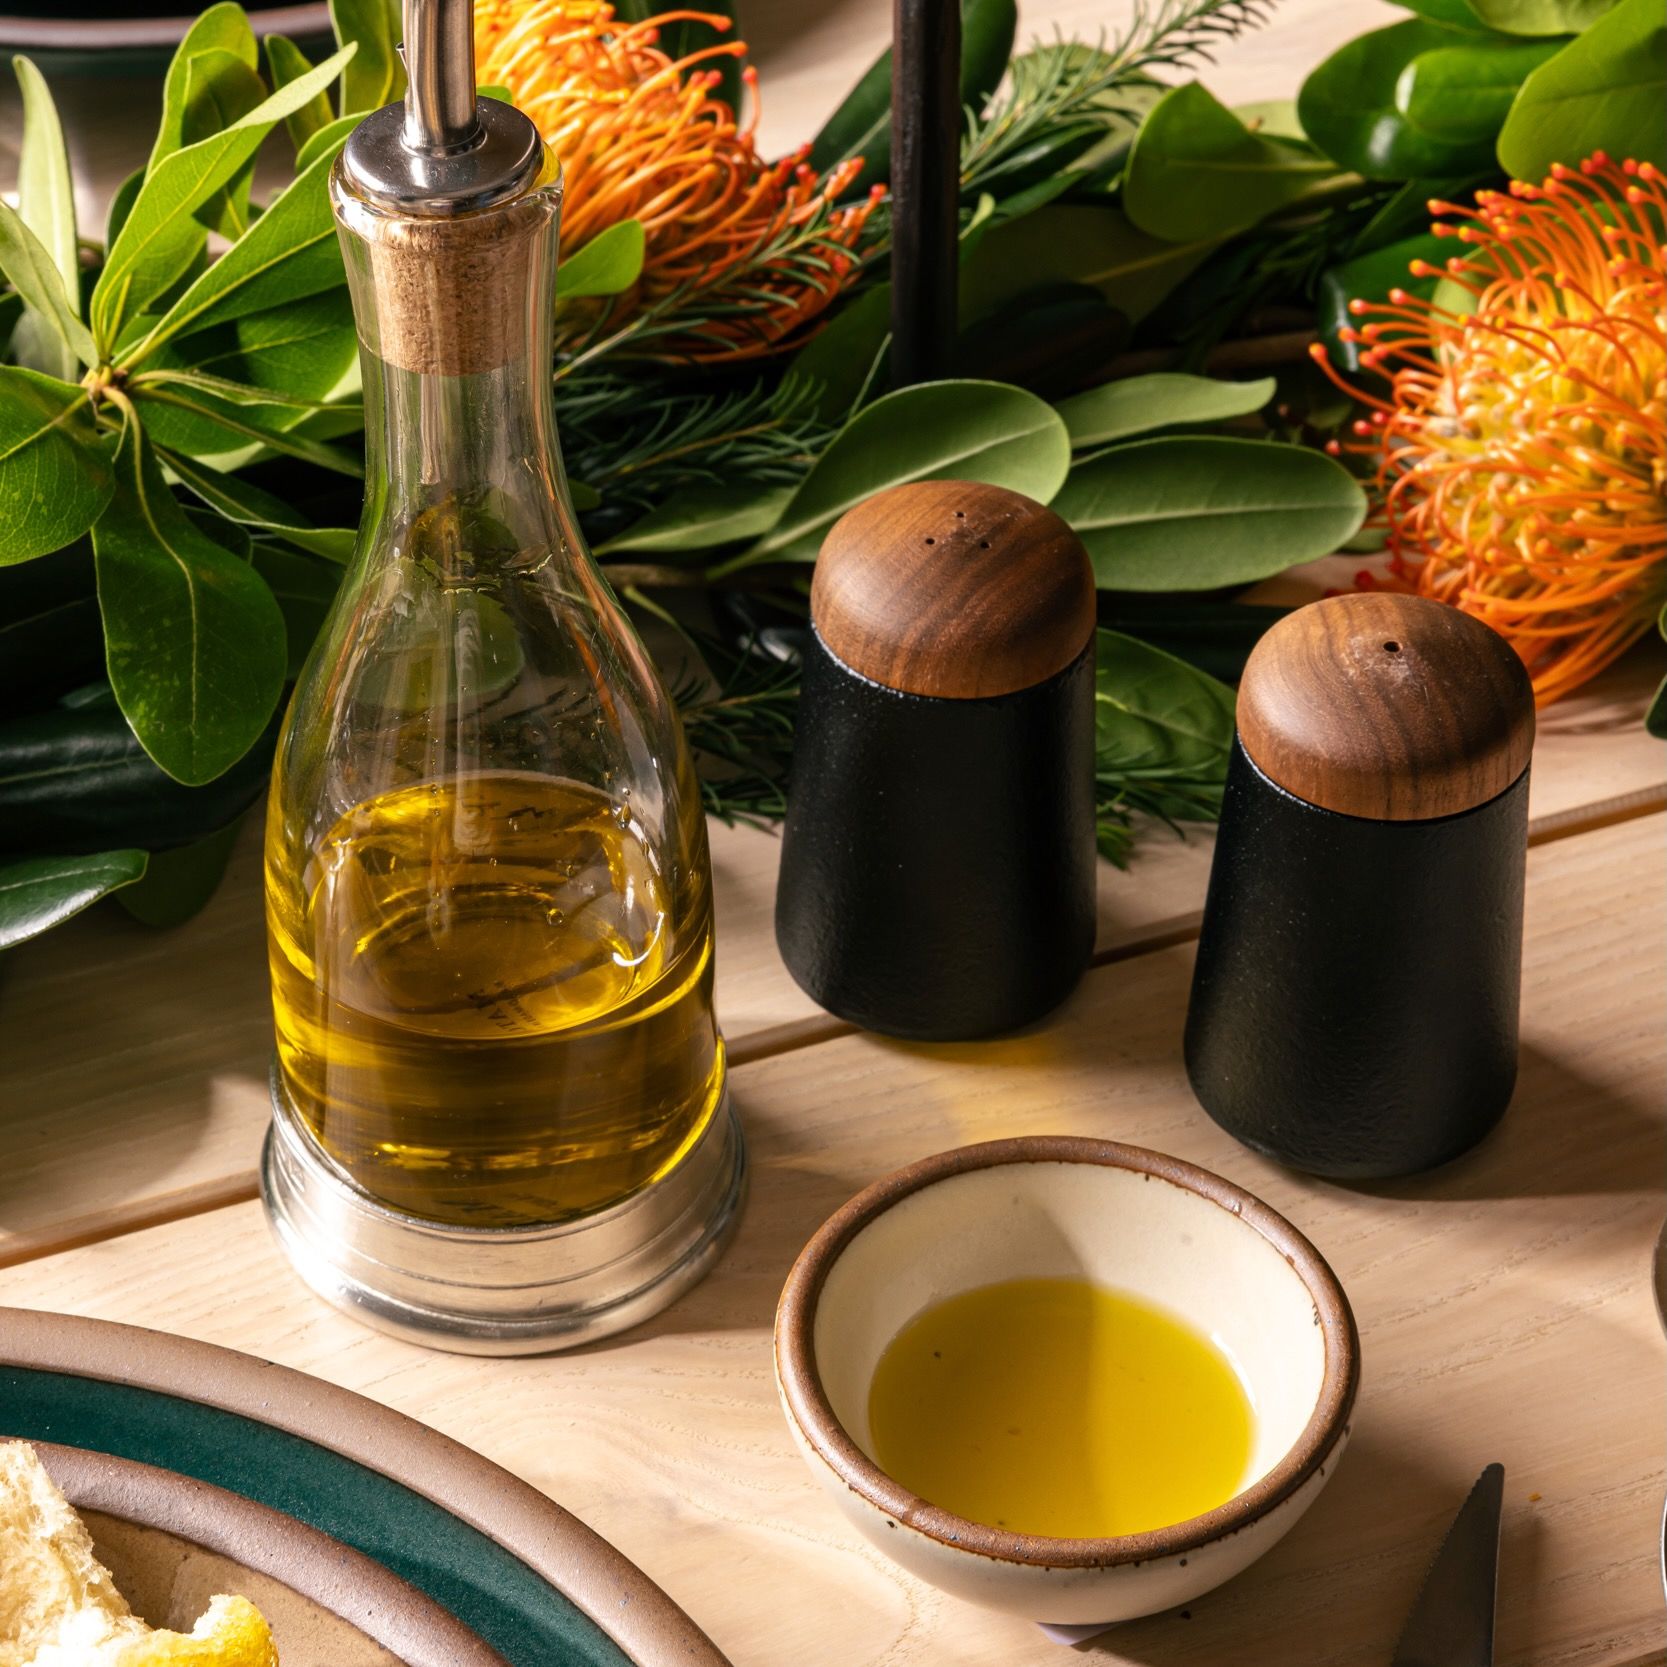 On a table, sits a set of salt and pepper shakers with a black cast iron base with a rounded walnut wood top on a white background. Also on the table is greenery centerpiece, a glass and pewter oil cruet, and a tiny white bowl filled with oil.